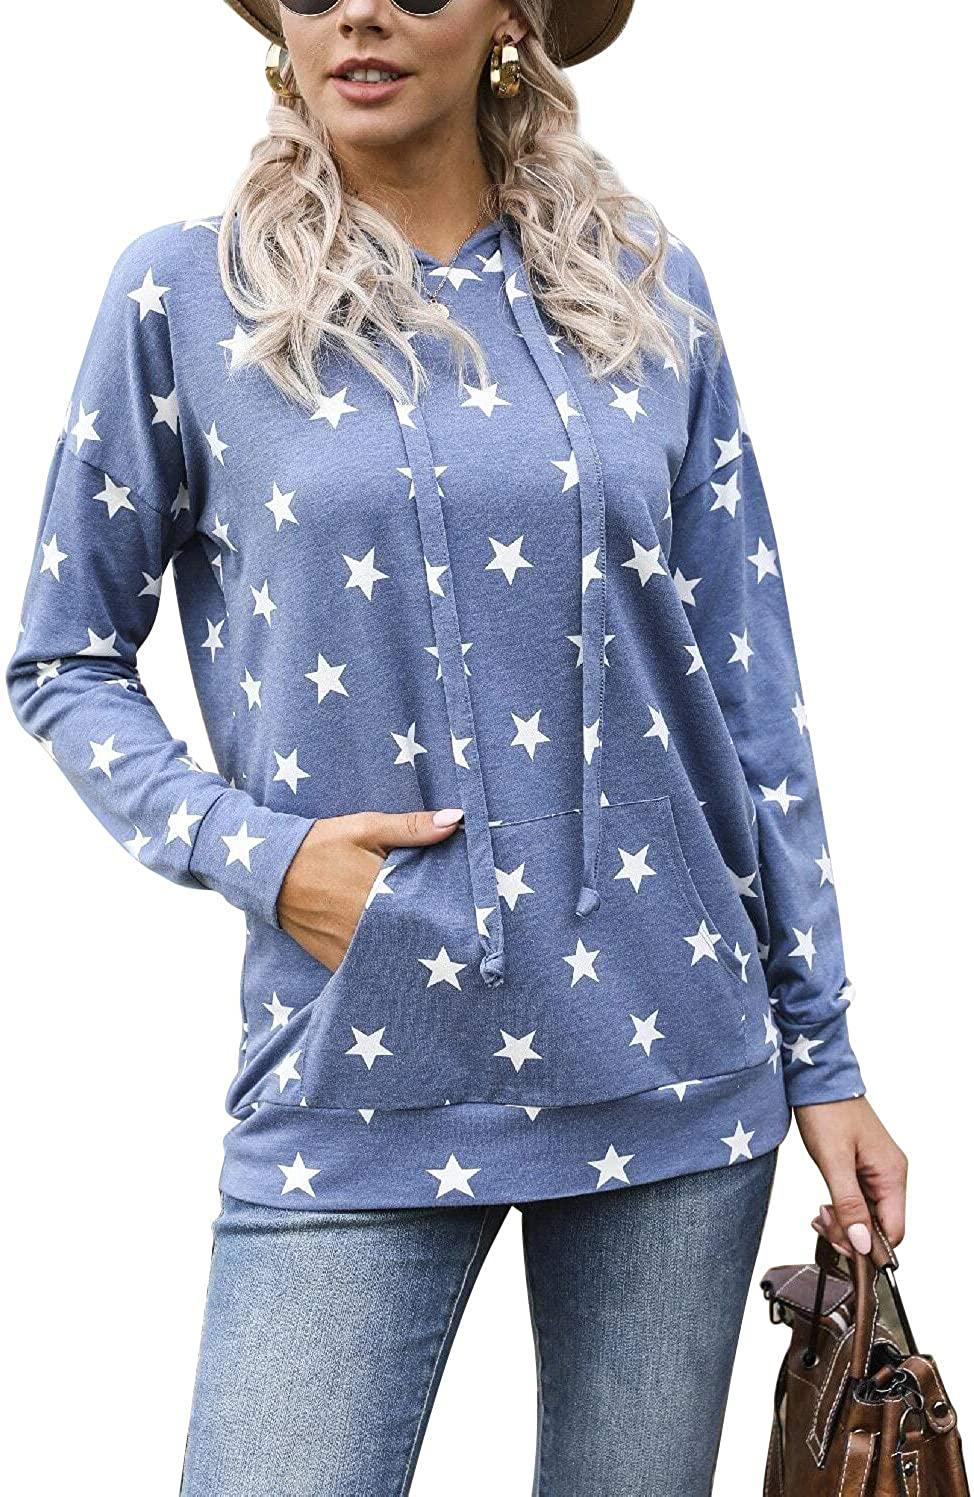 GRECERELLE Women's Floral Long Sleeve Casual Sweatshirts Tunic Tops With Pockets